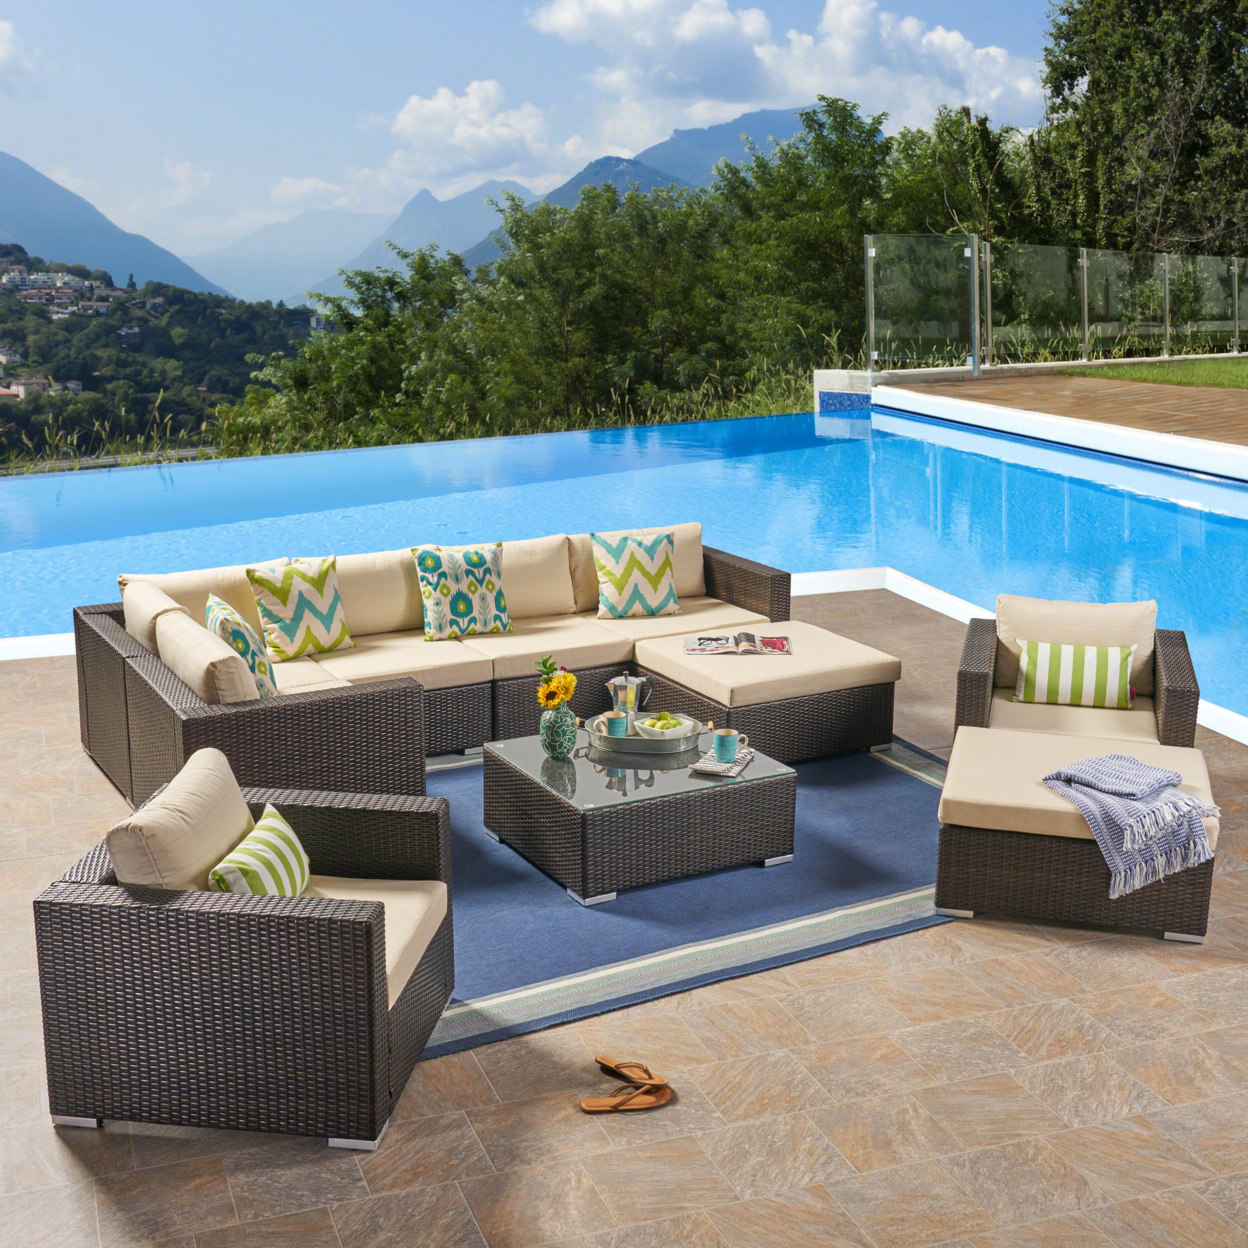 Karl Outdoor 7 Seater Wicker Sectional Sofa With Aluminum Frame - Brown